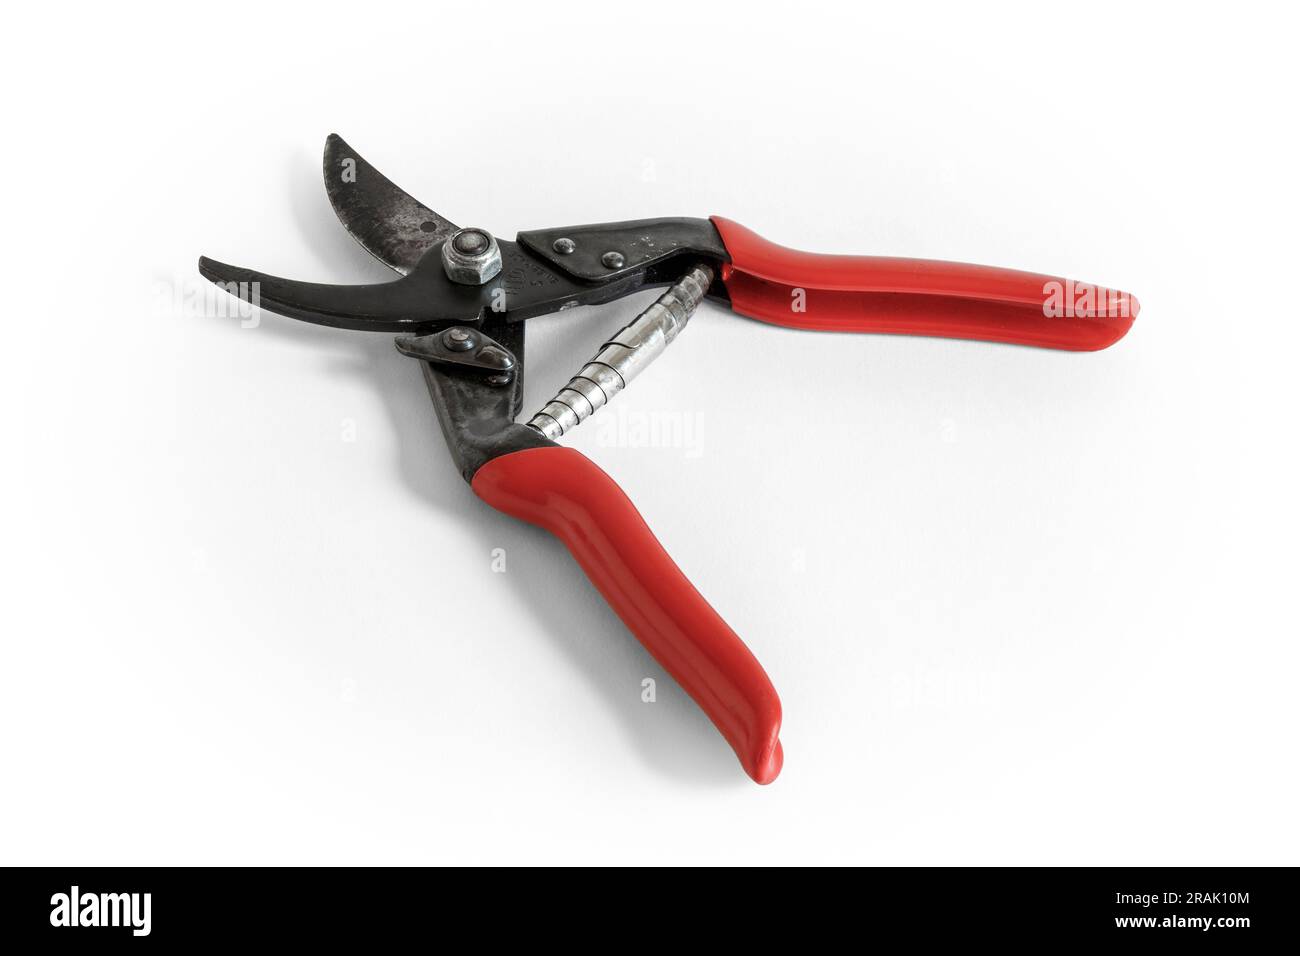 A pair of red-handled garden secateurs in open position, isolated on a white background, UK Stock Photo